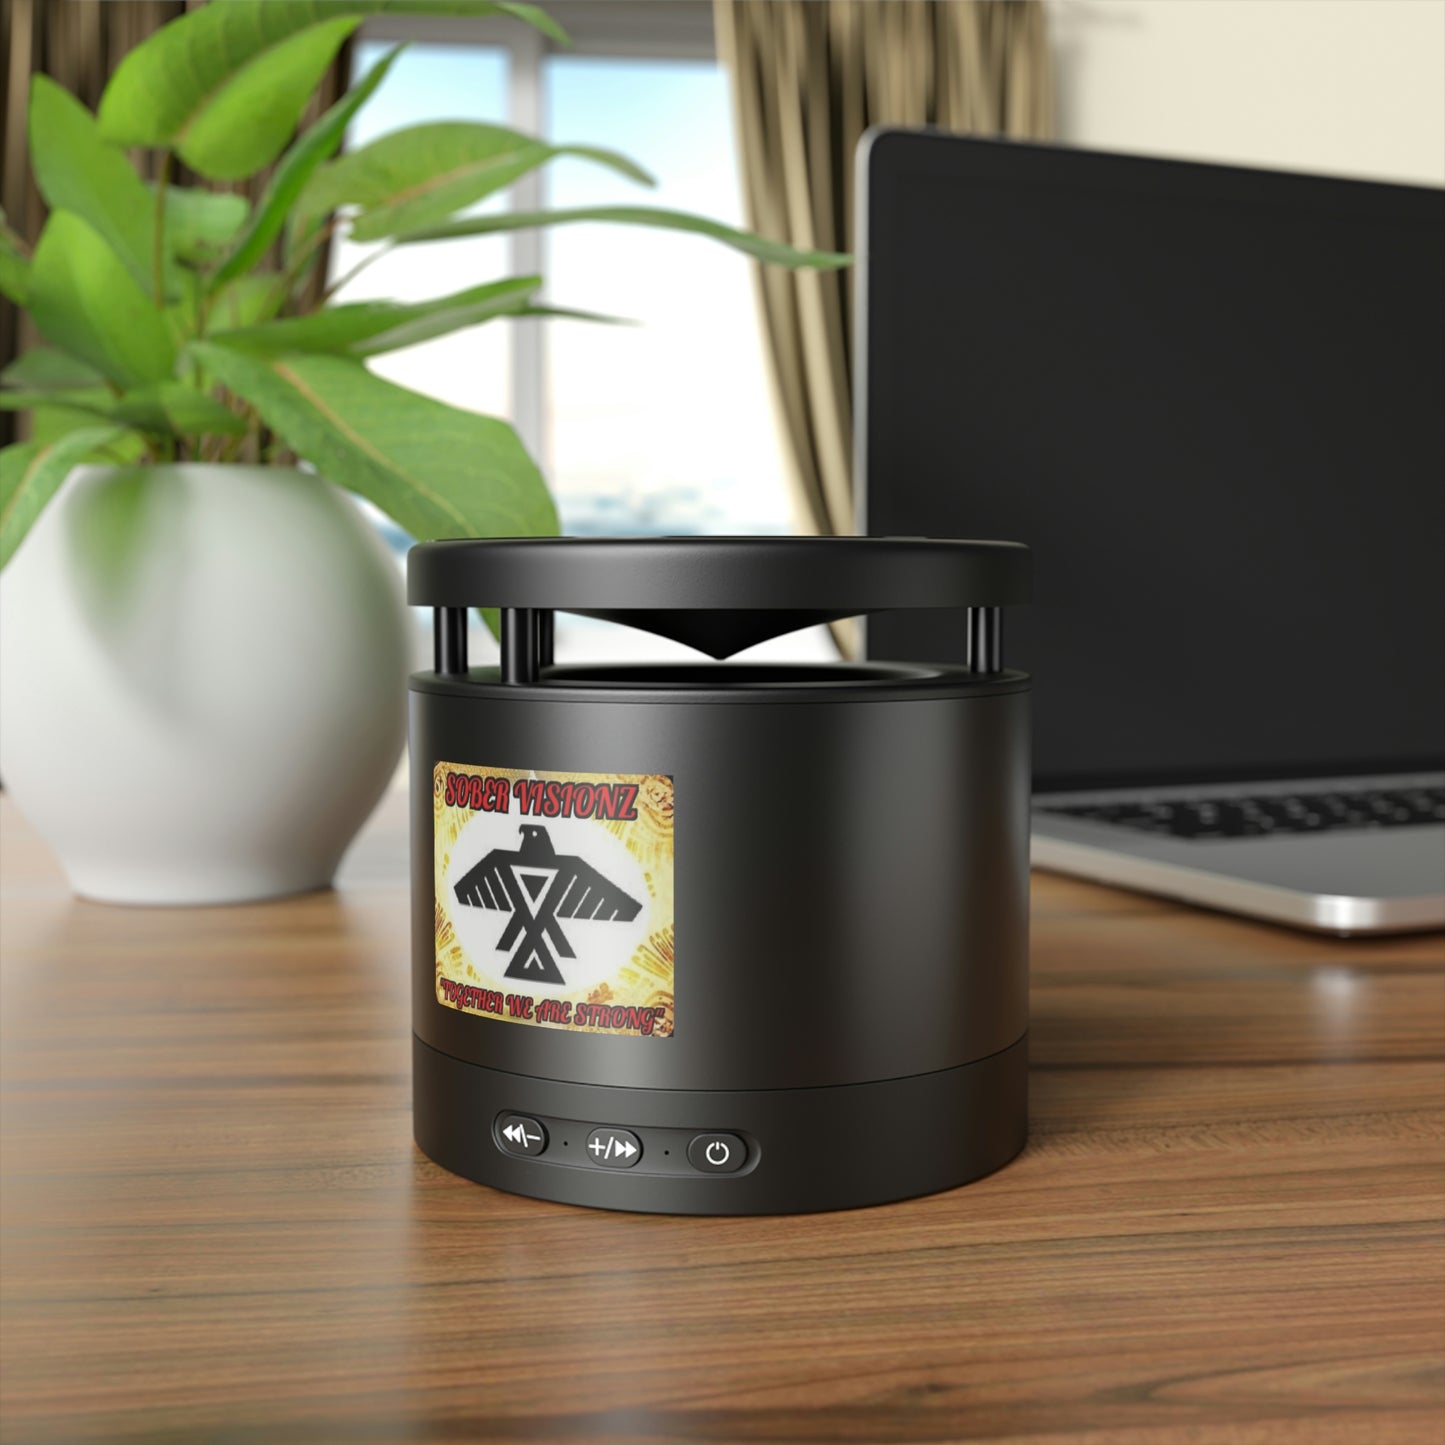 Sober Visionz Metal Bluetooth Speaker and Wireless Charging Pad